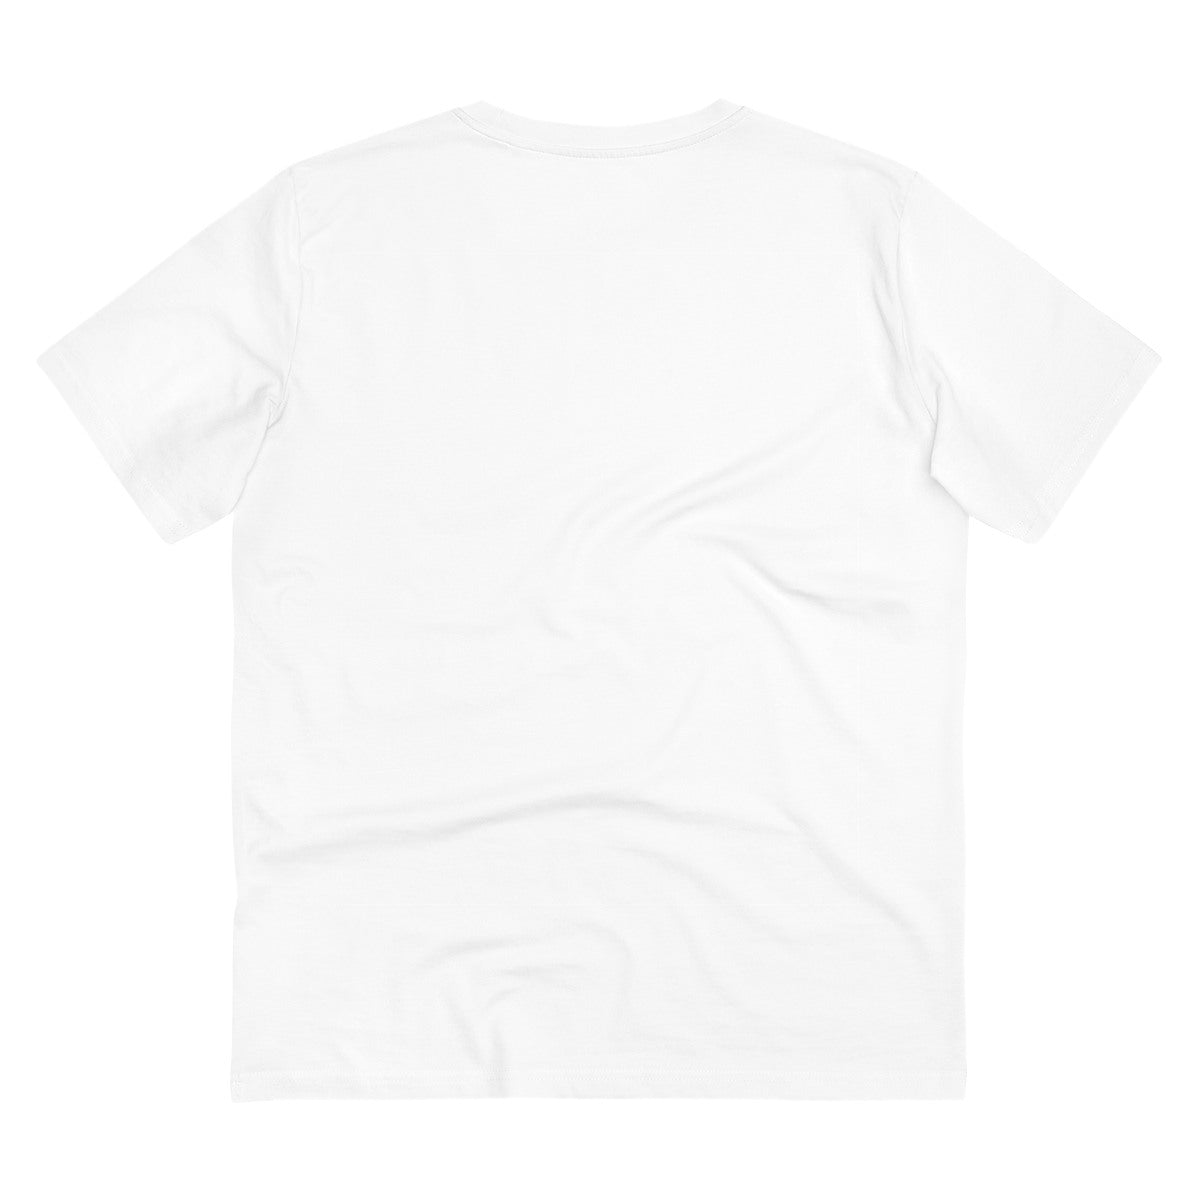 Men's PC Cotton 74th Birthday Printed T Shirt (Color: White, Thread Count: 180GSM) - GillKart